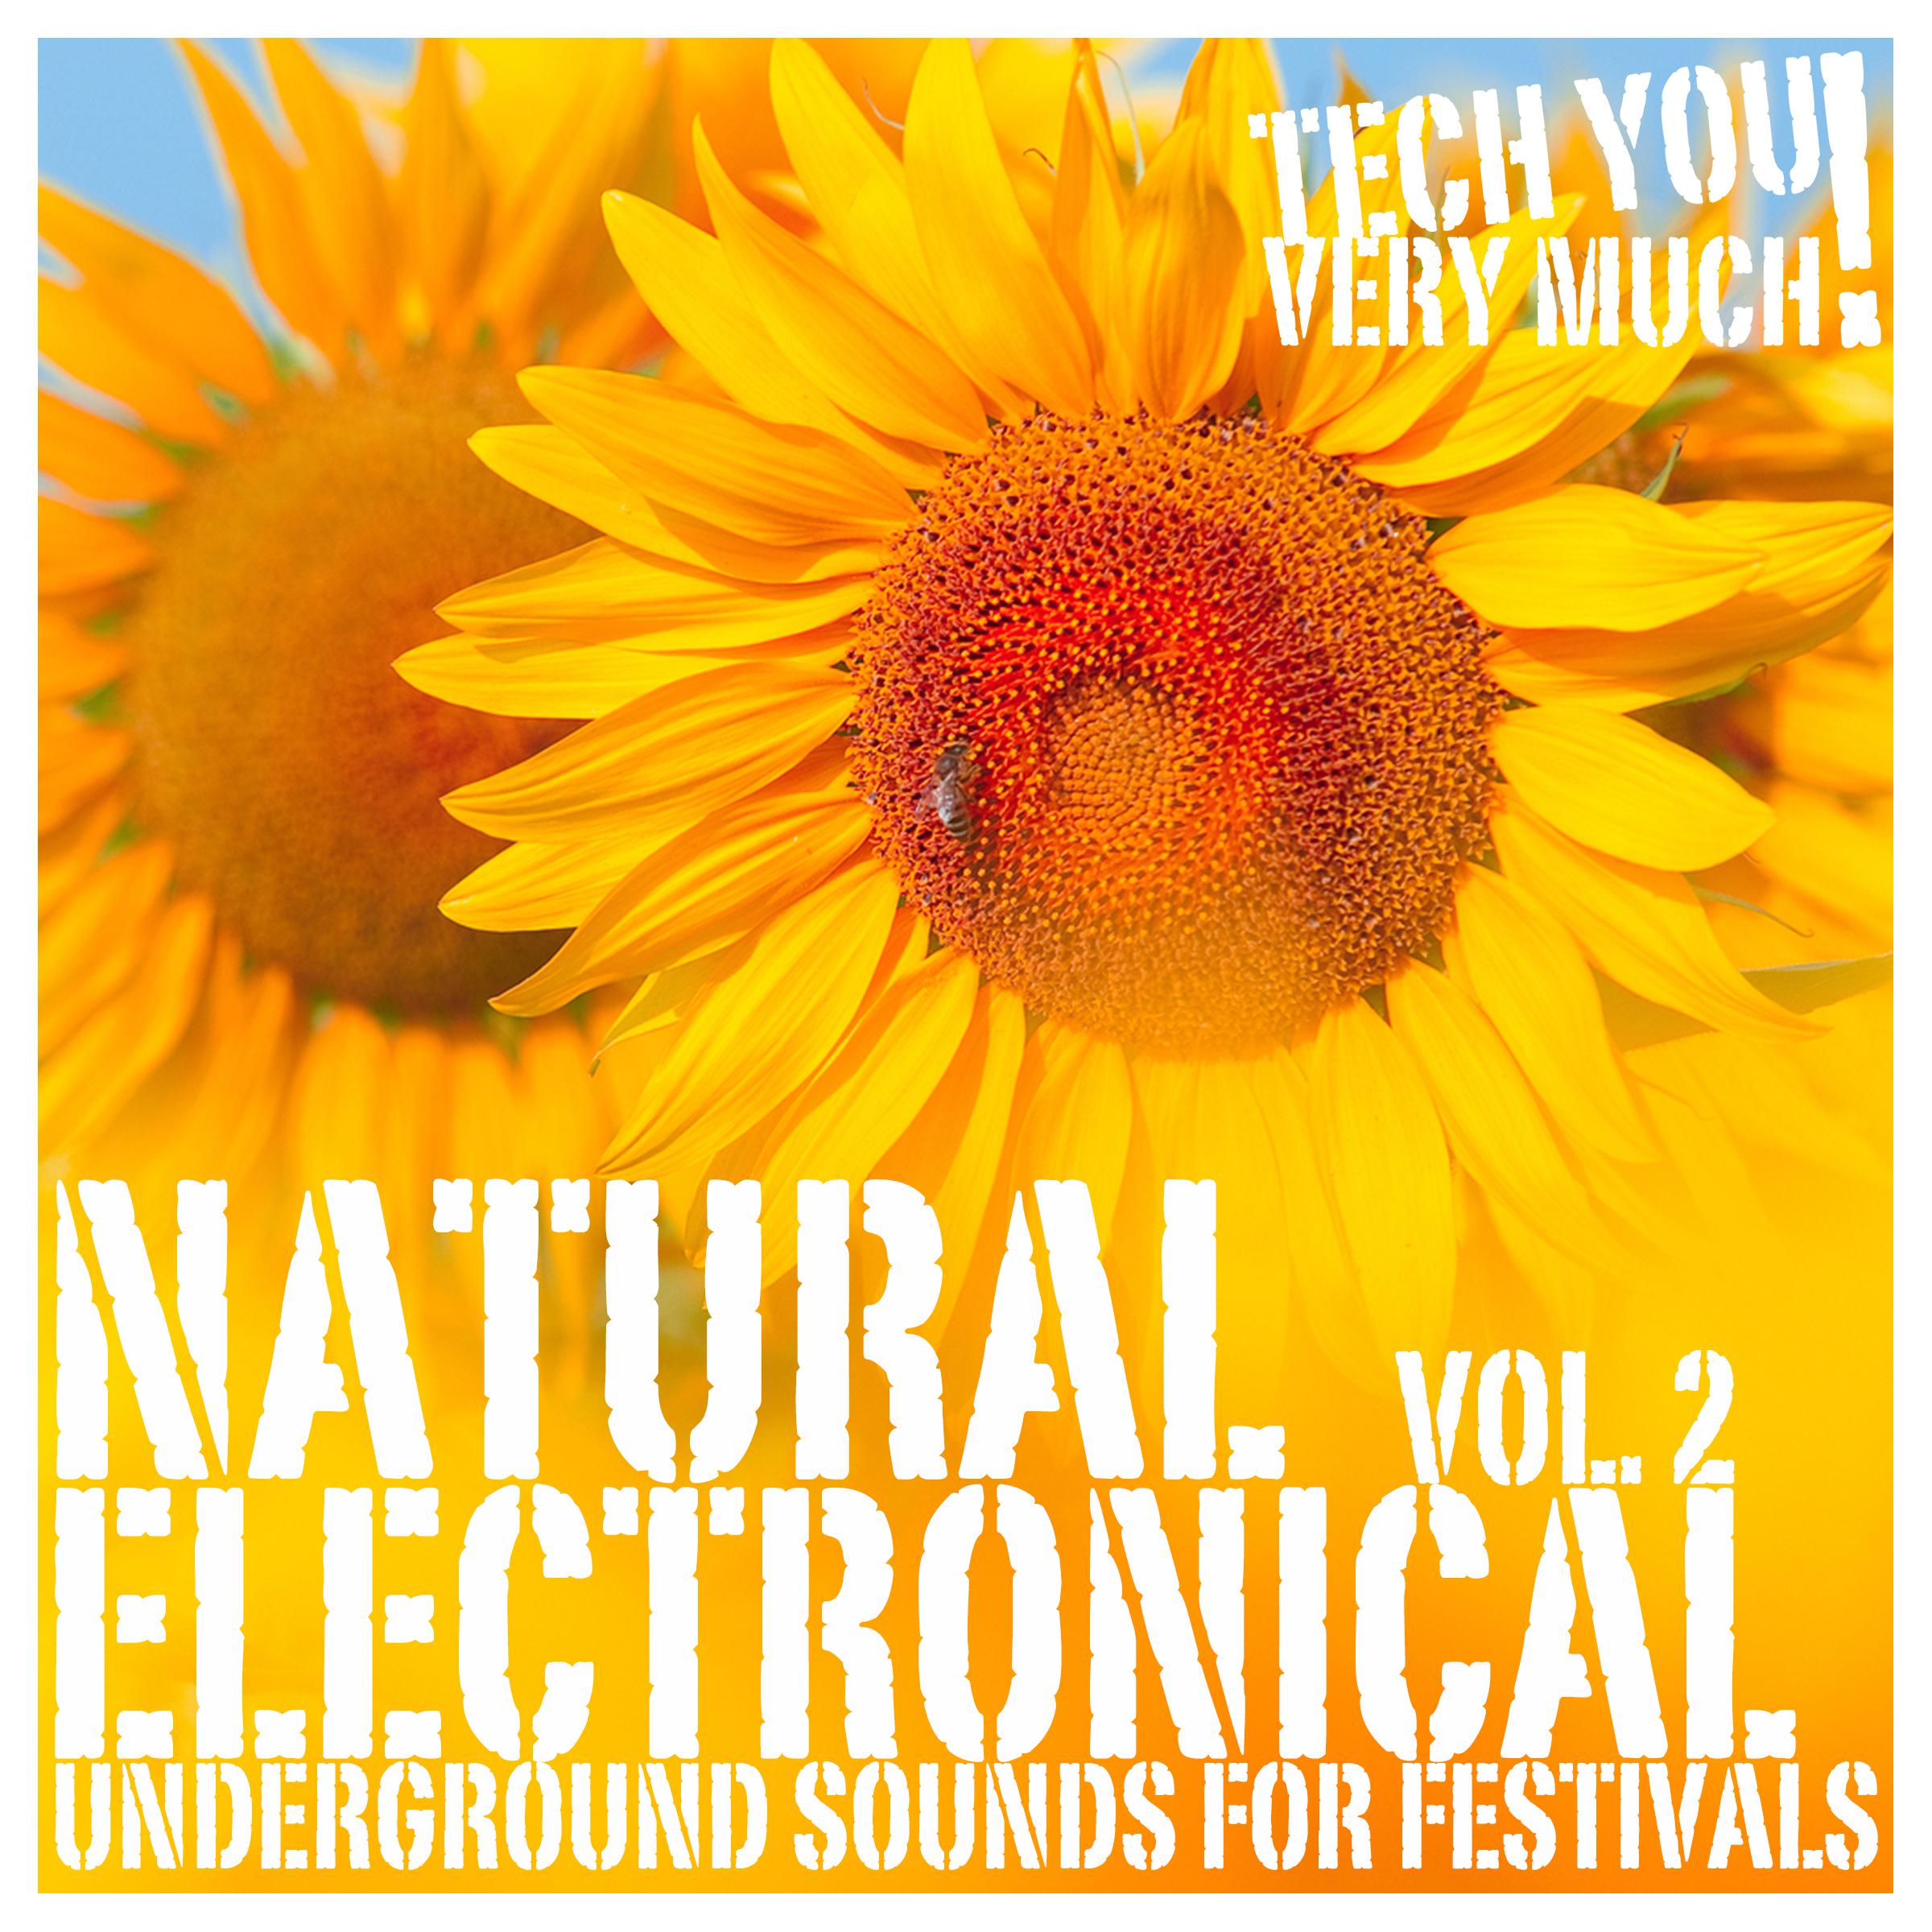 Natural Electronical, Vol. 2 (Underground Sounds for Festivals)